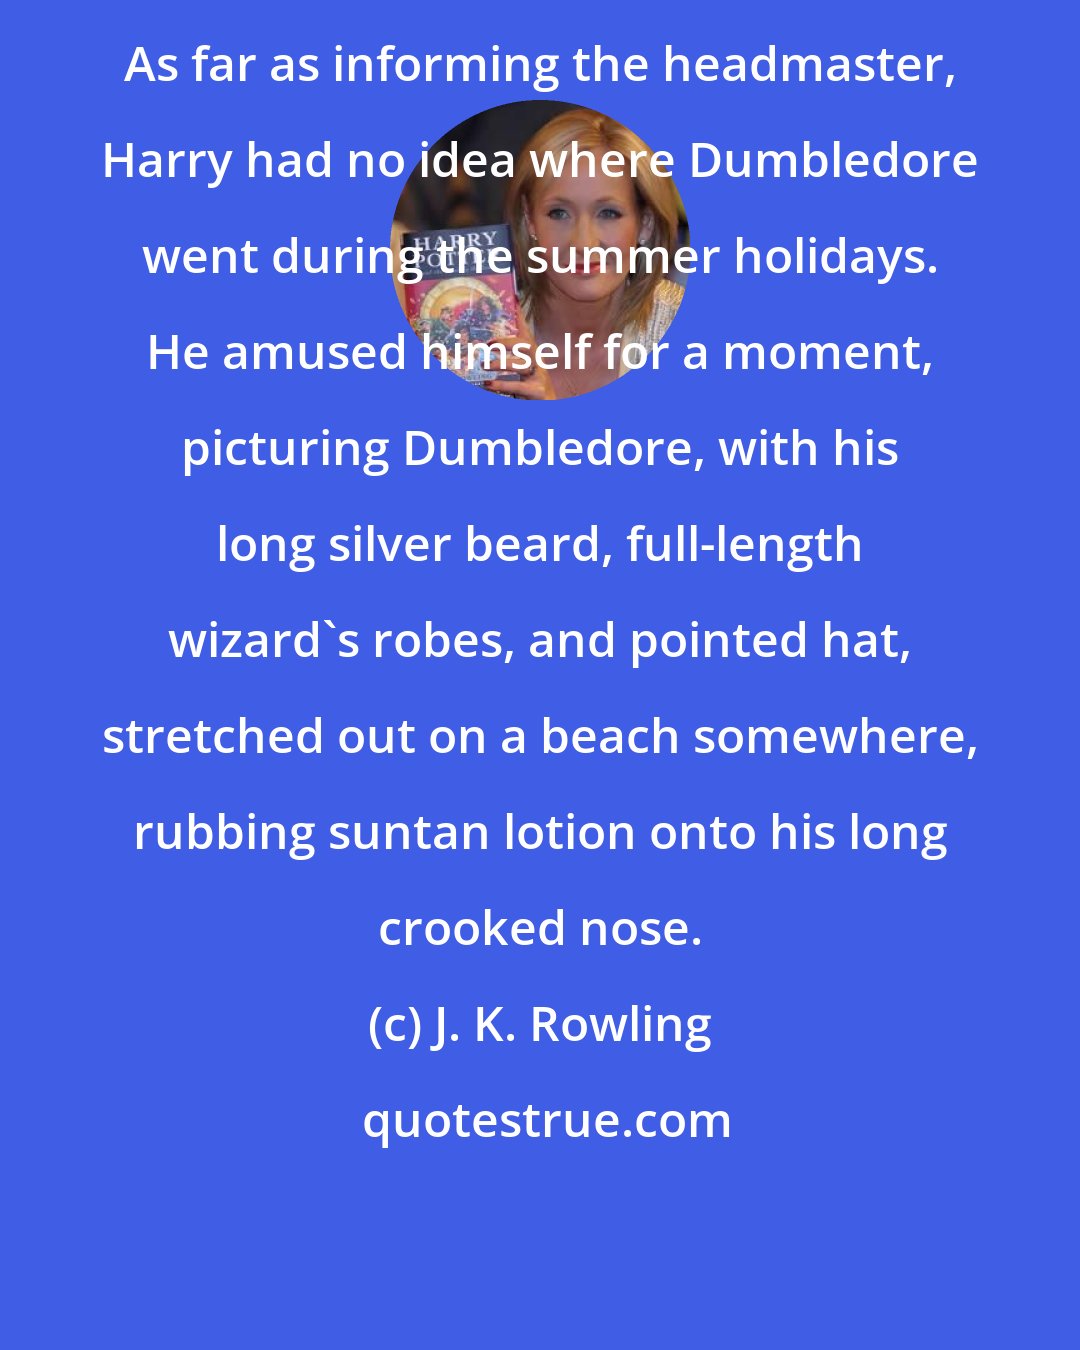 J. K. Rowling: As far as informing the headmaster, Harry had no idea where Dumbledore went during the summer holidays. He amused himself for a moment, picturing Dumbledore, with his long silver beard, full-length wizard's robes, and pointed hat, stretched out on a beach somewhere, rubbing suntan lotion onto his long crooked nose.